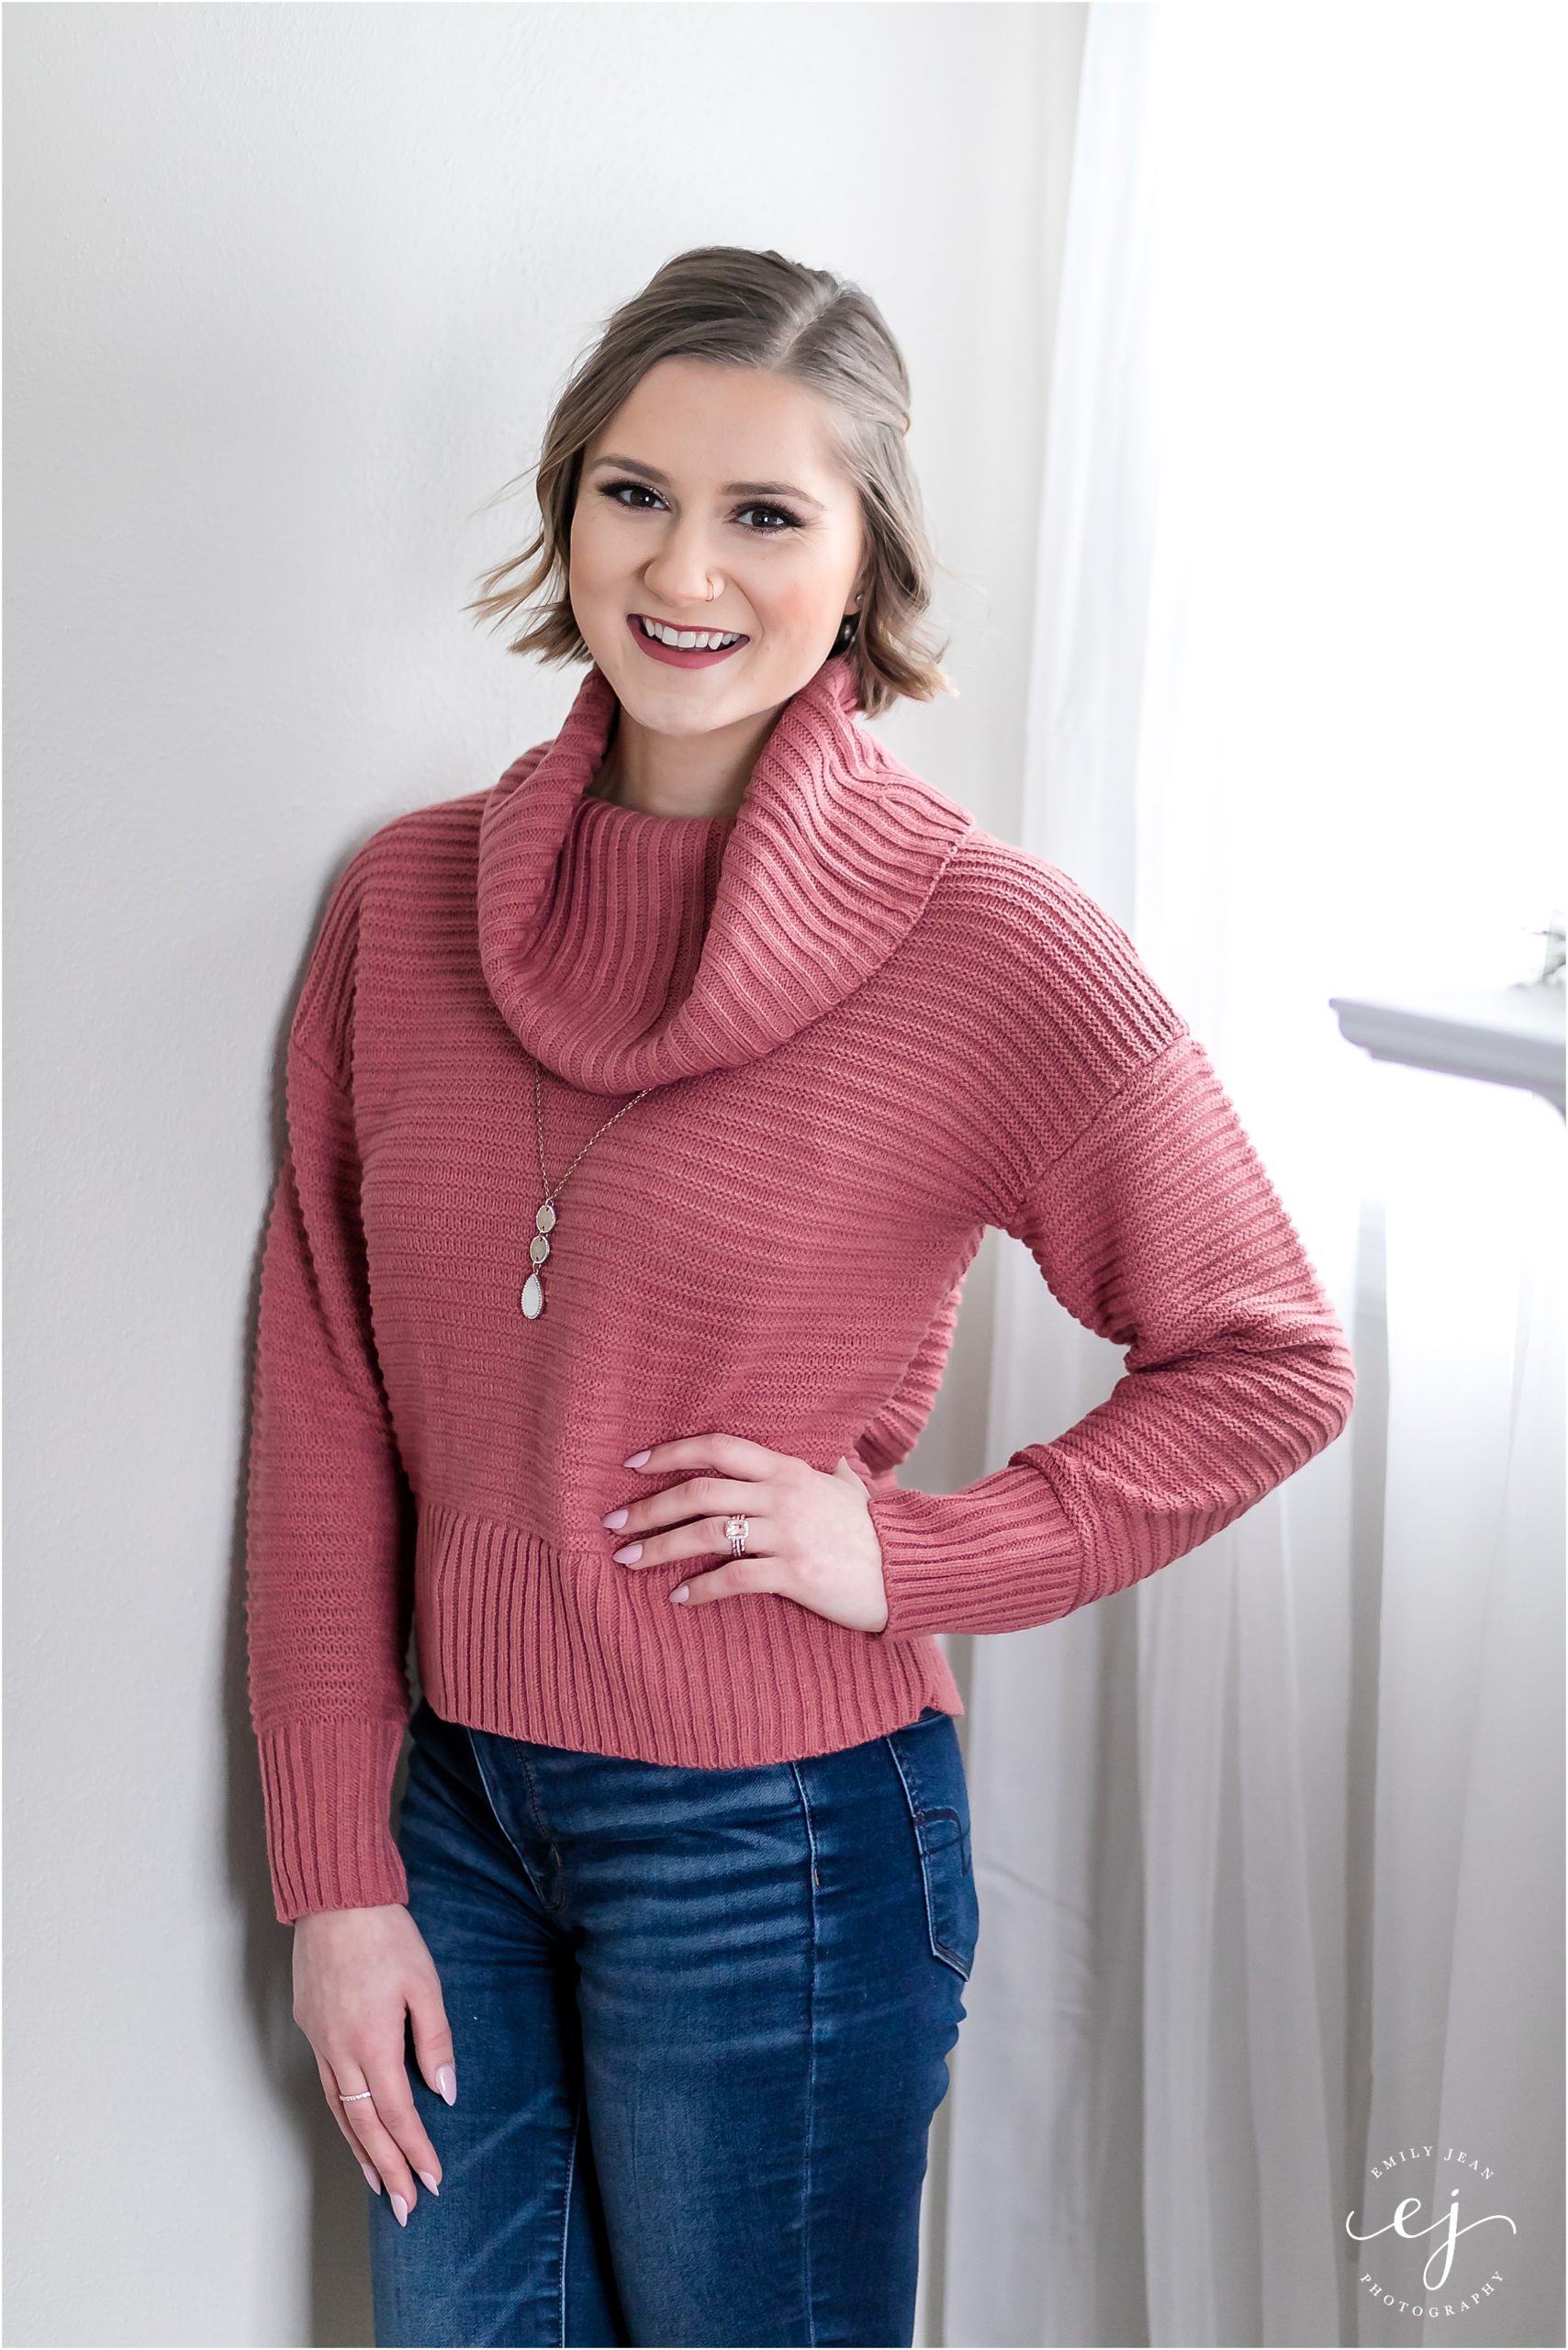 lifestyle photos for makeup artist standing in a pink sweater headshot